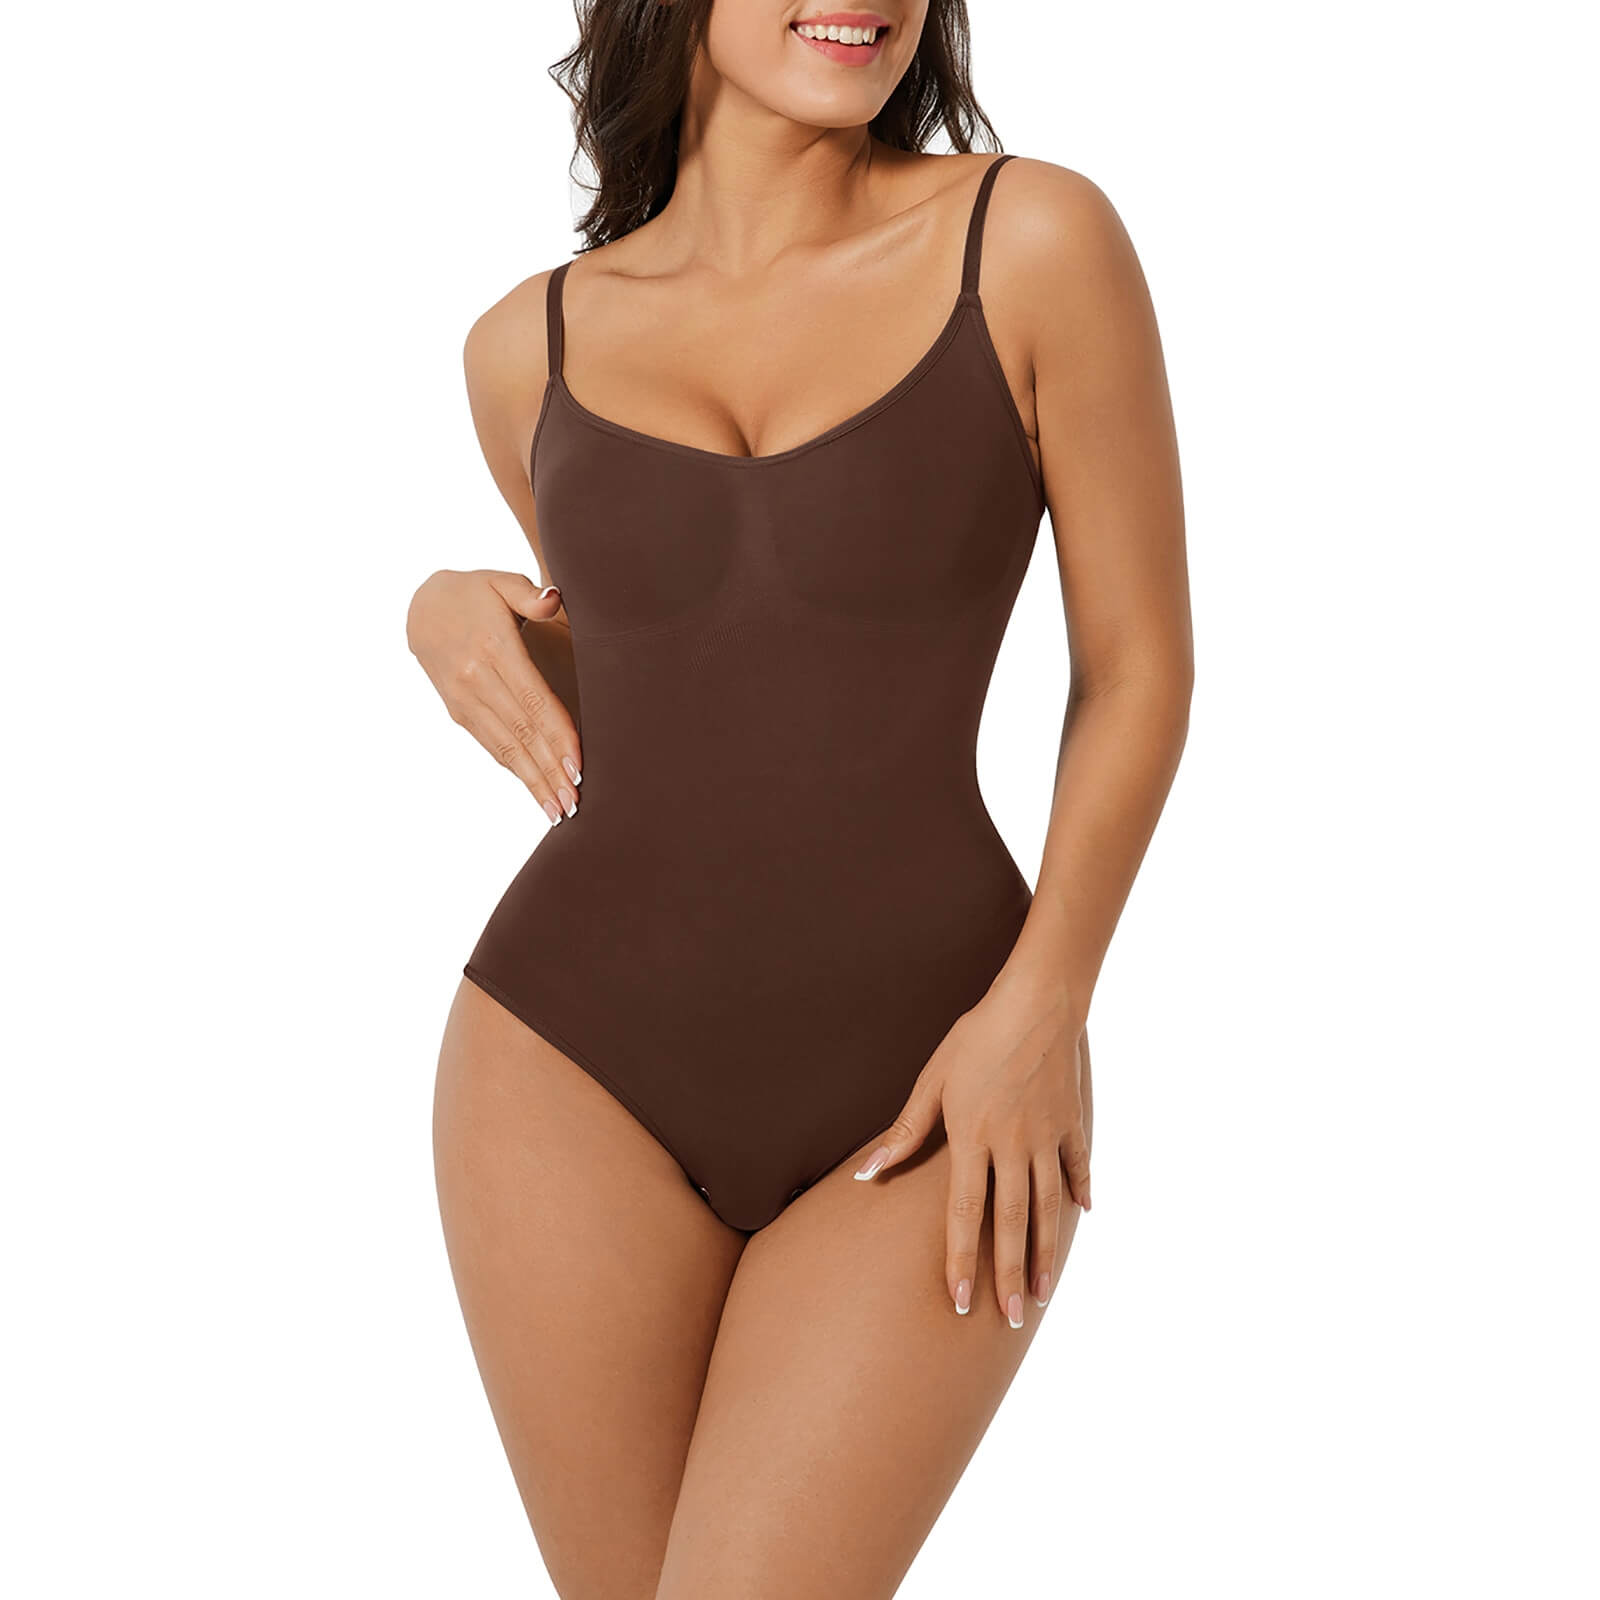 Can Shapewear Be Worn Every Day? - Snatched body